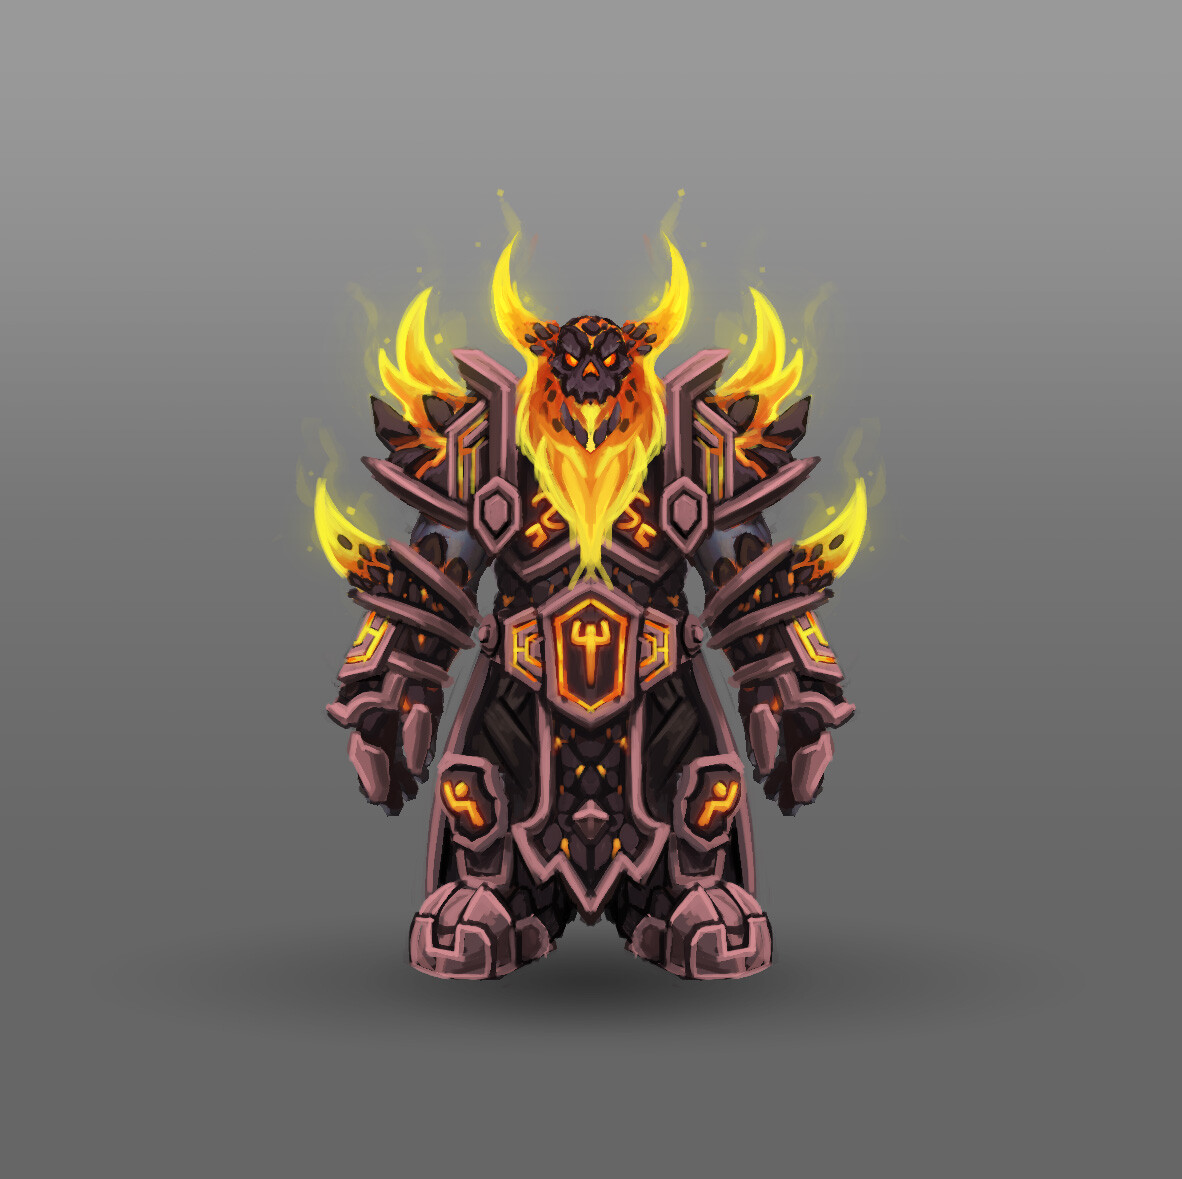 Shaman

Ragnaros is a big part of the Dark Iron lore, so I thought fire would be a good thing to design around.